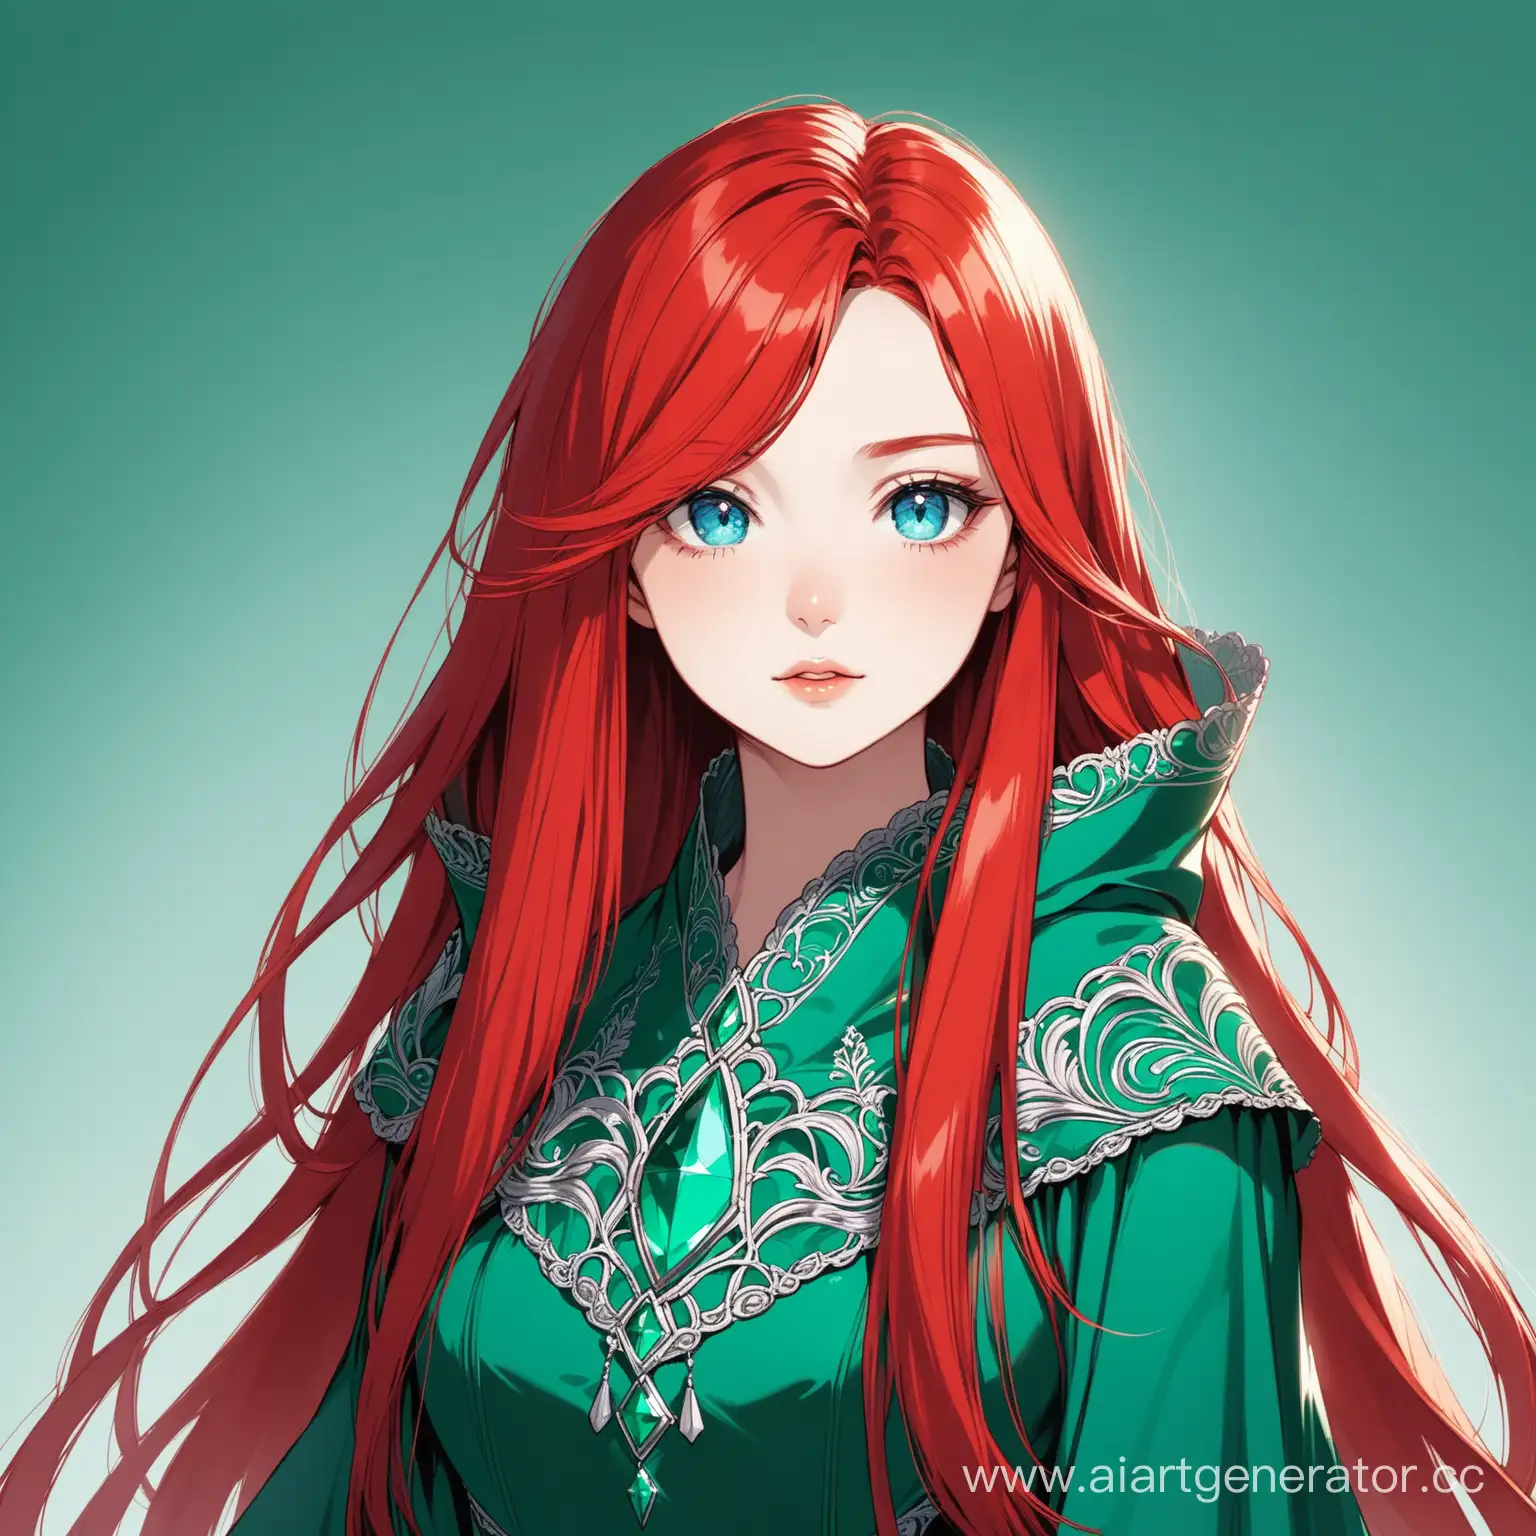 Enigmatic-Emerald-Beauty-with-Long-Red-Hair-and-GrayBlue-Eyes